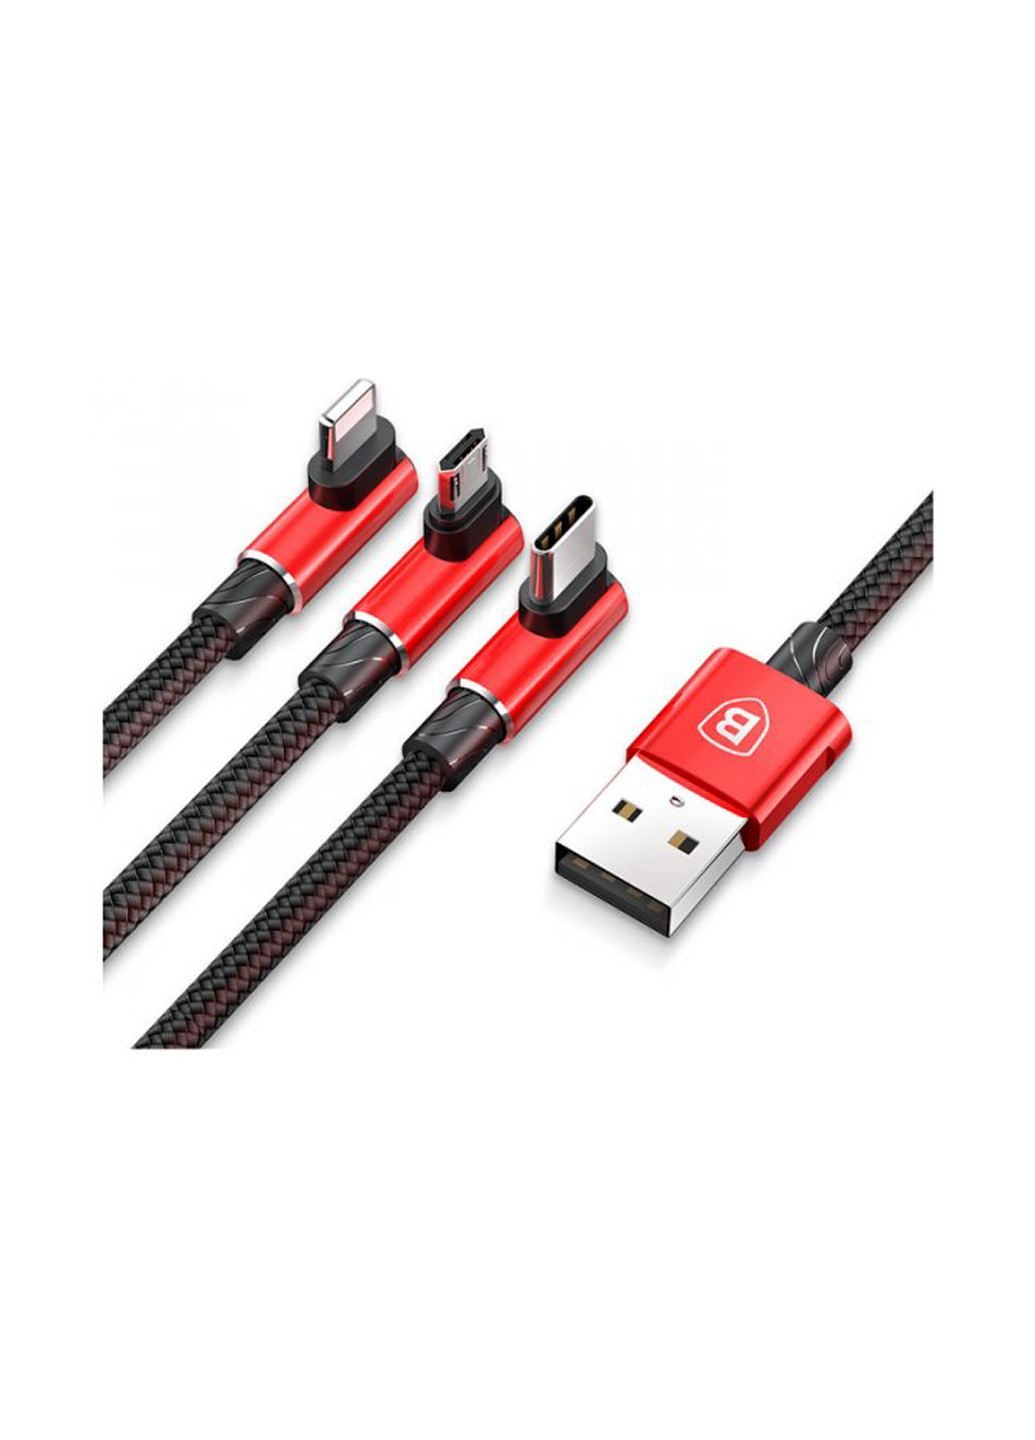 Кабель MVP 3 in 1 Mobile Game Cable USB for M + L + T 3.5A 1.2M Red (CAMLT-WZ09) Baseus mvp 3 in 1 mobile game cable usb for m+l+t (135000184)